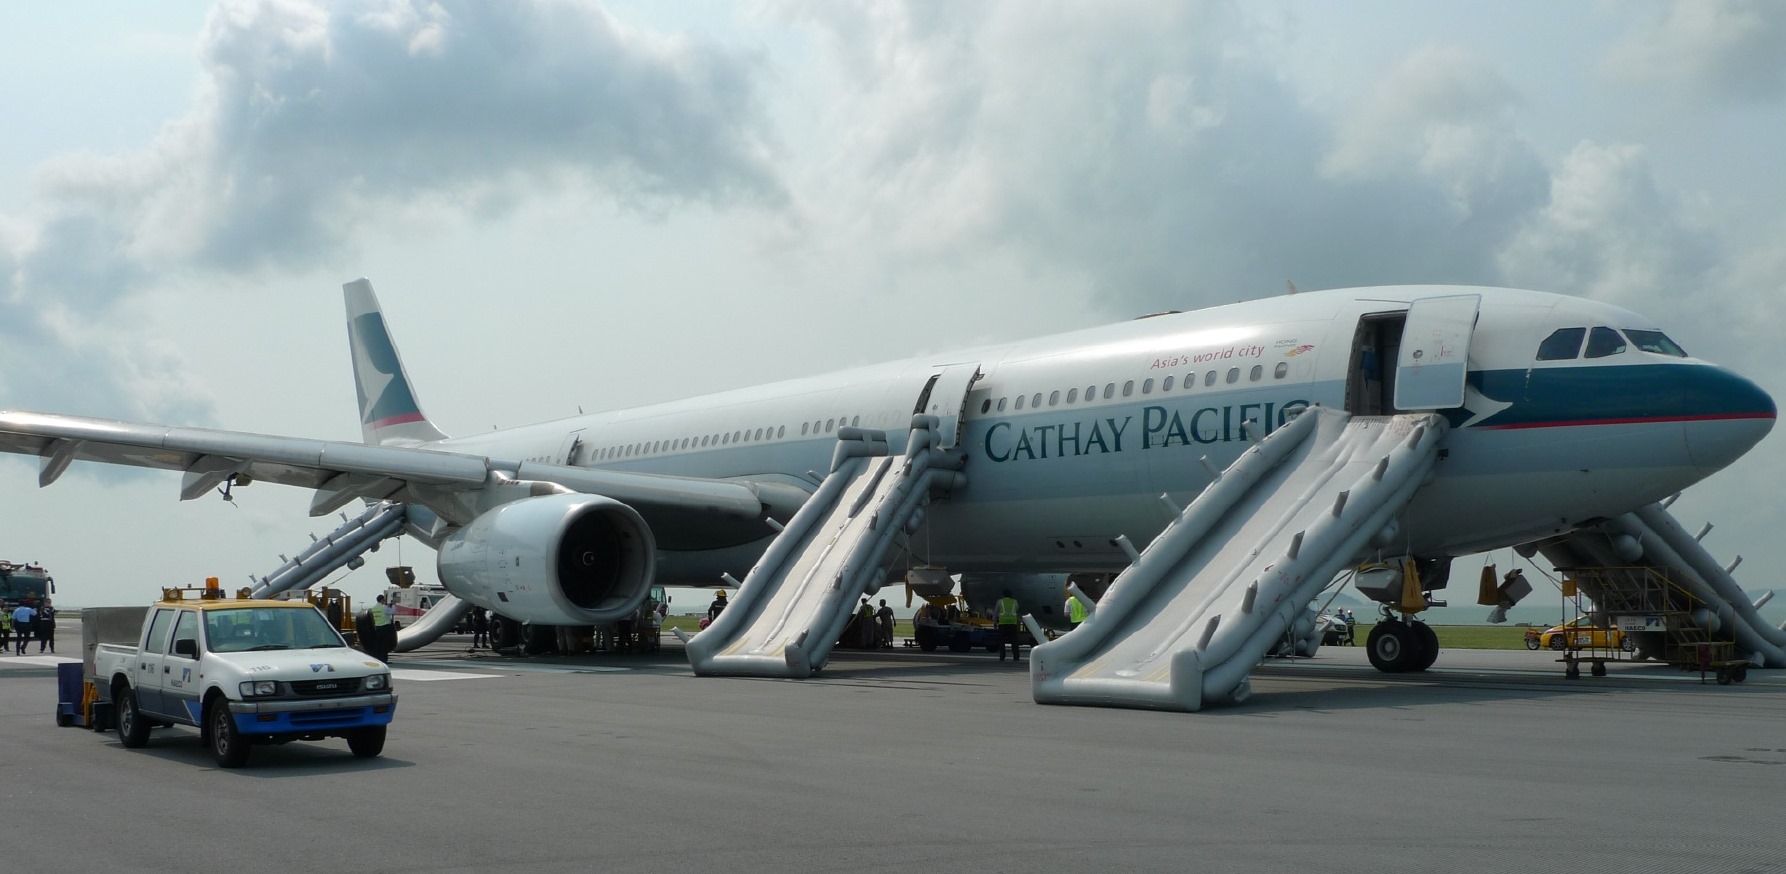 Miracle on Cathay Flight 780 - Loss of Thrust Control